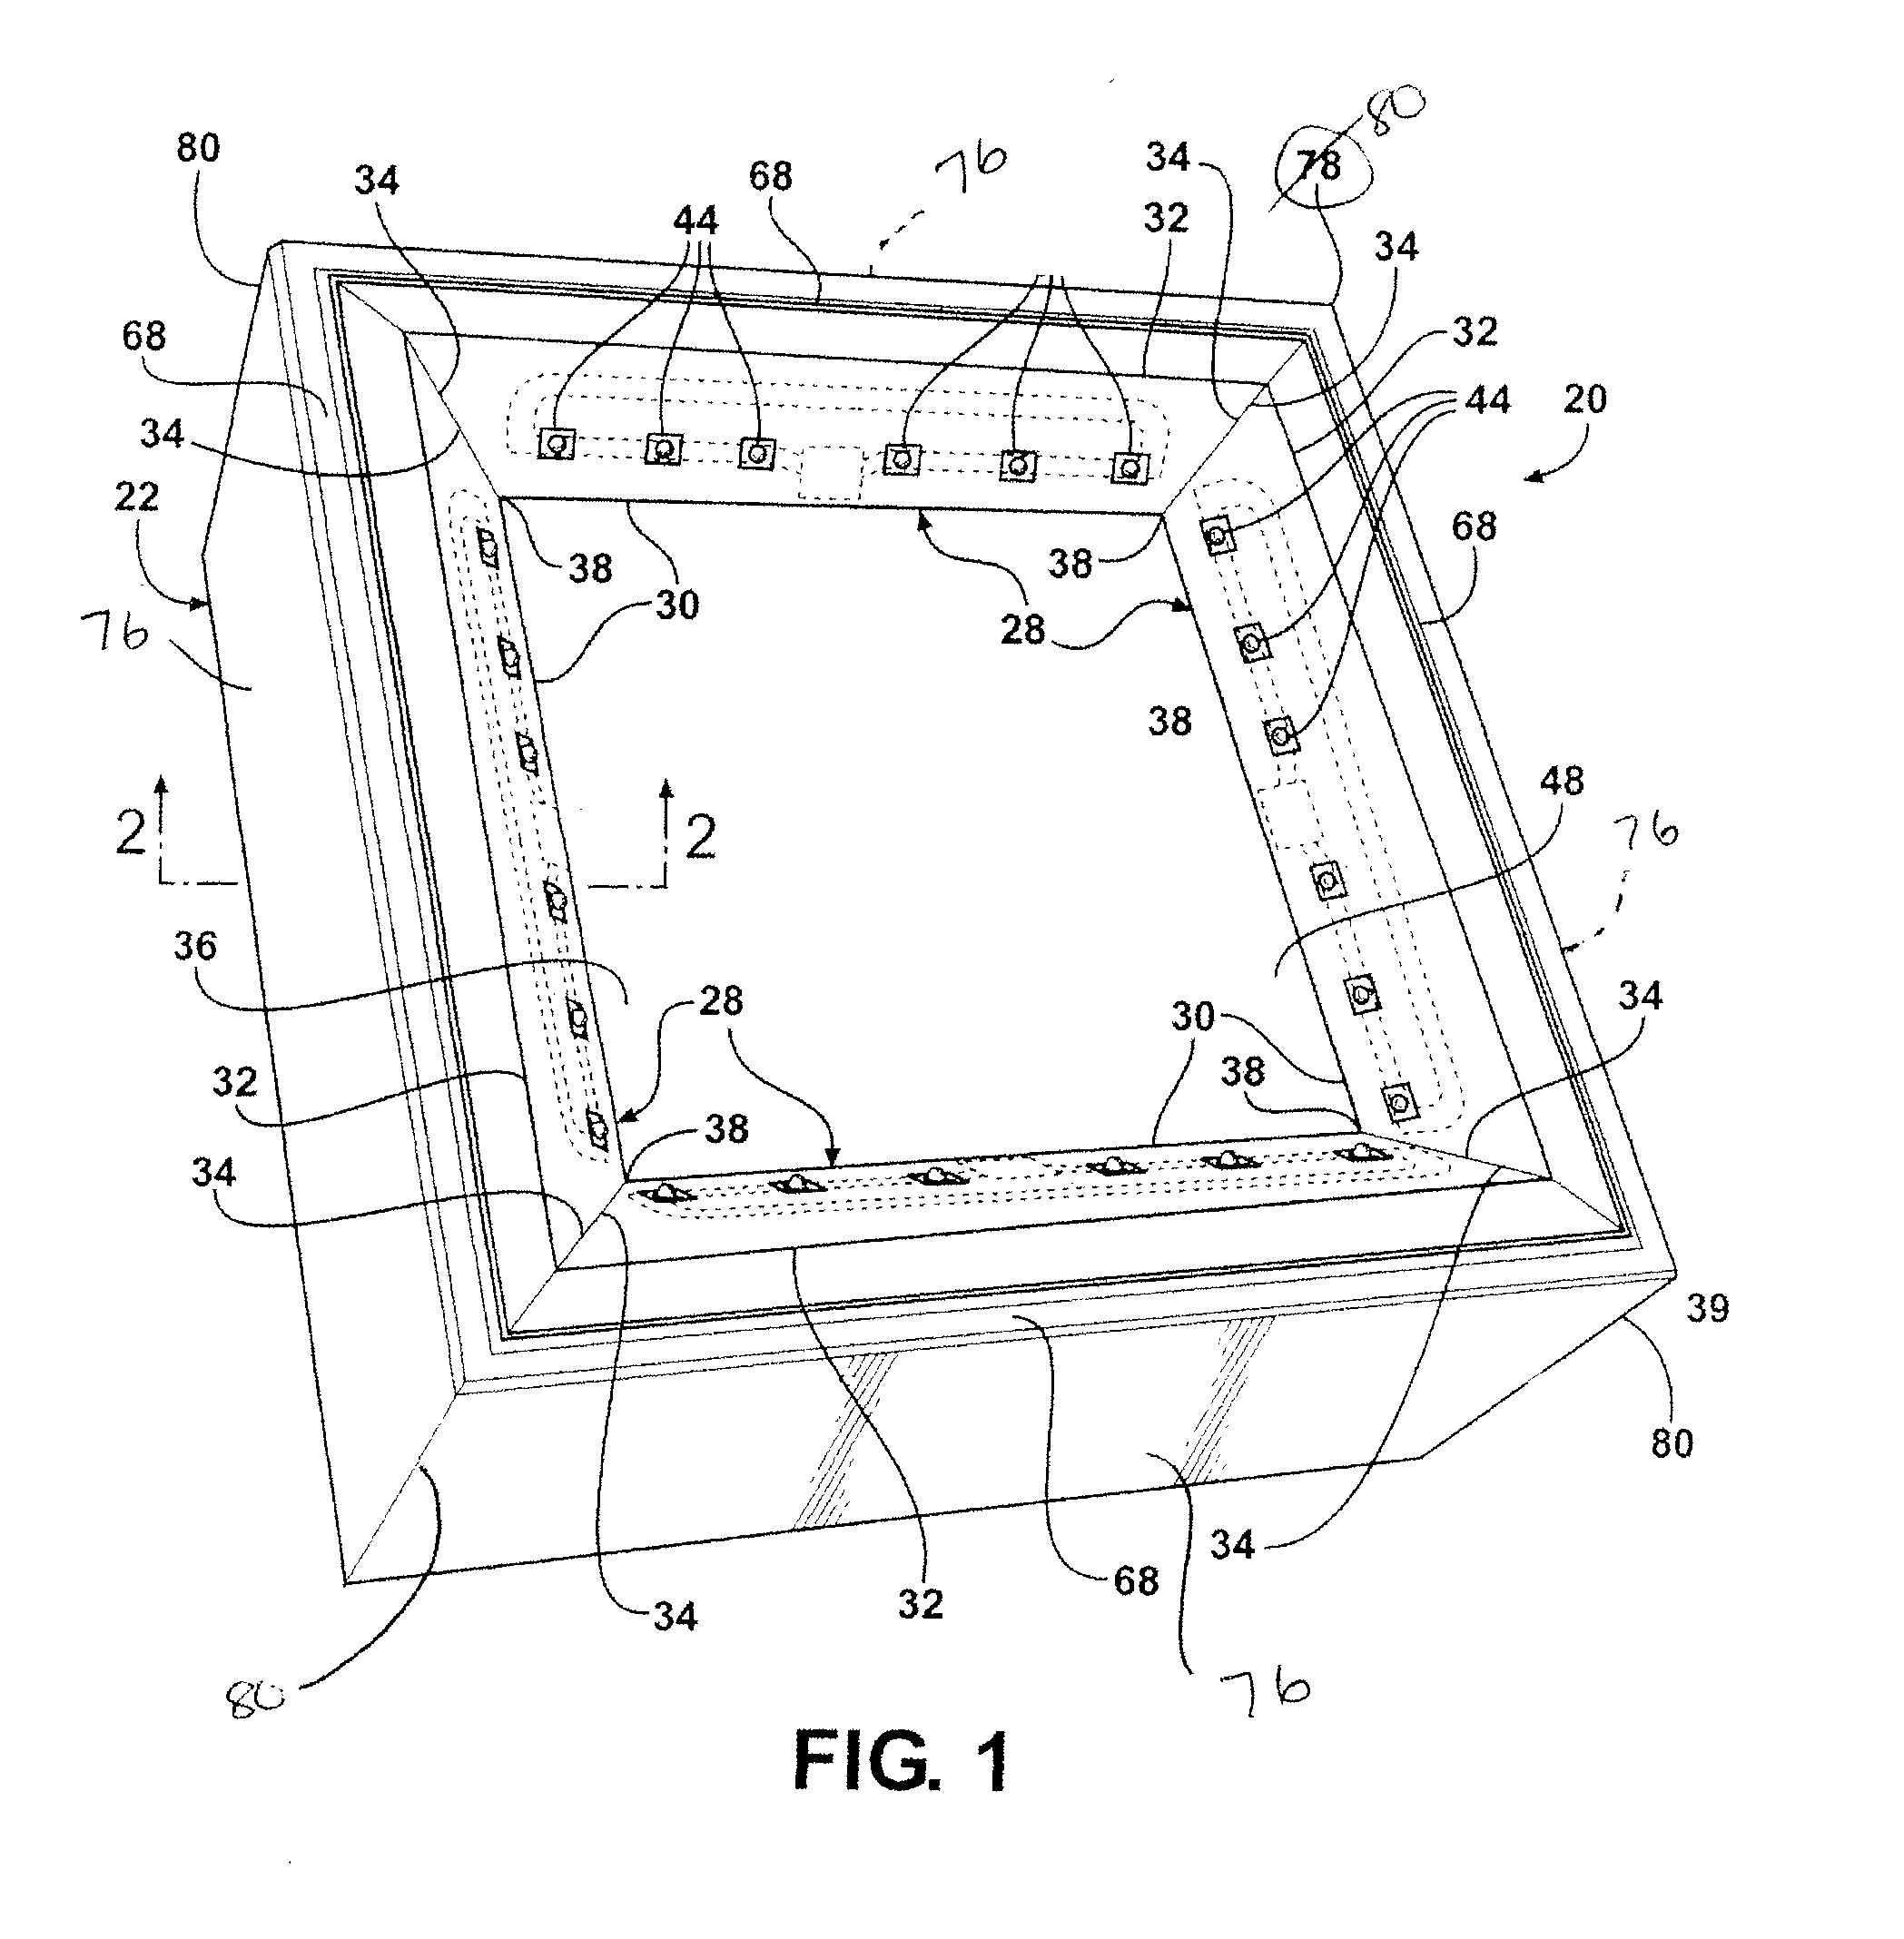 Integral heat sink and housing light emitting diode assembly